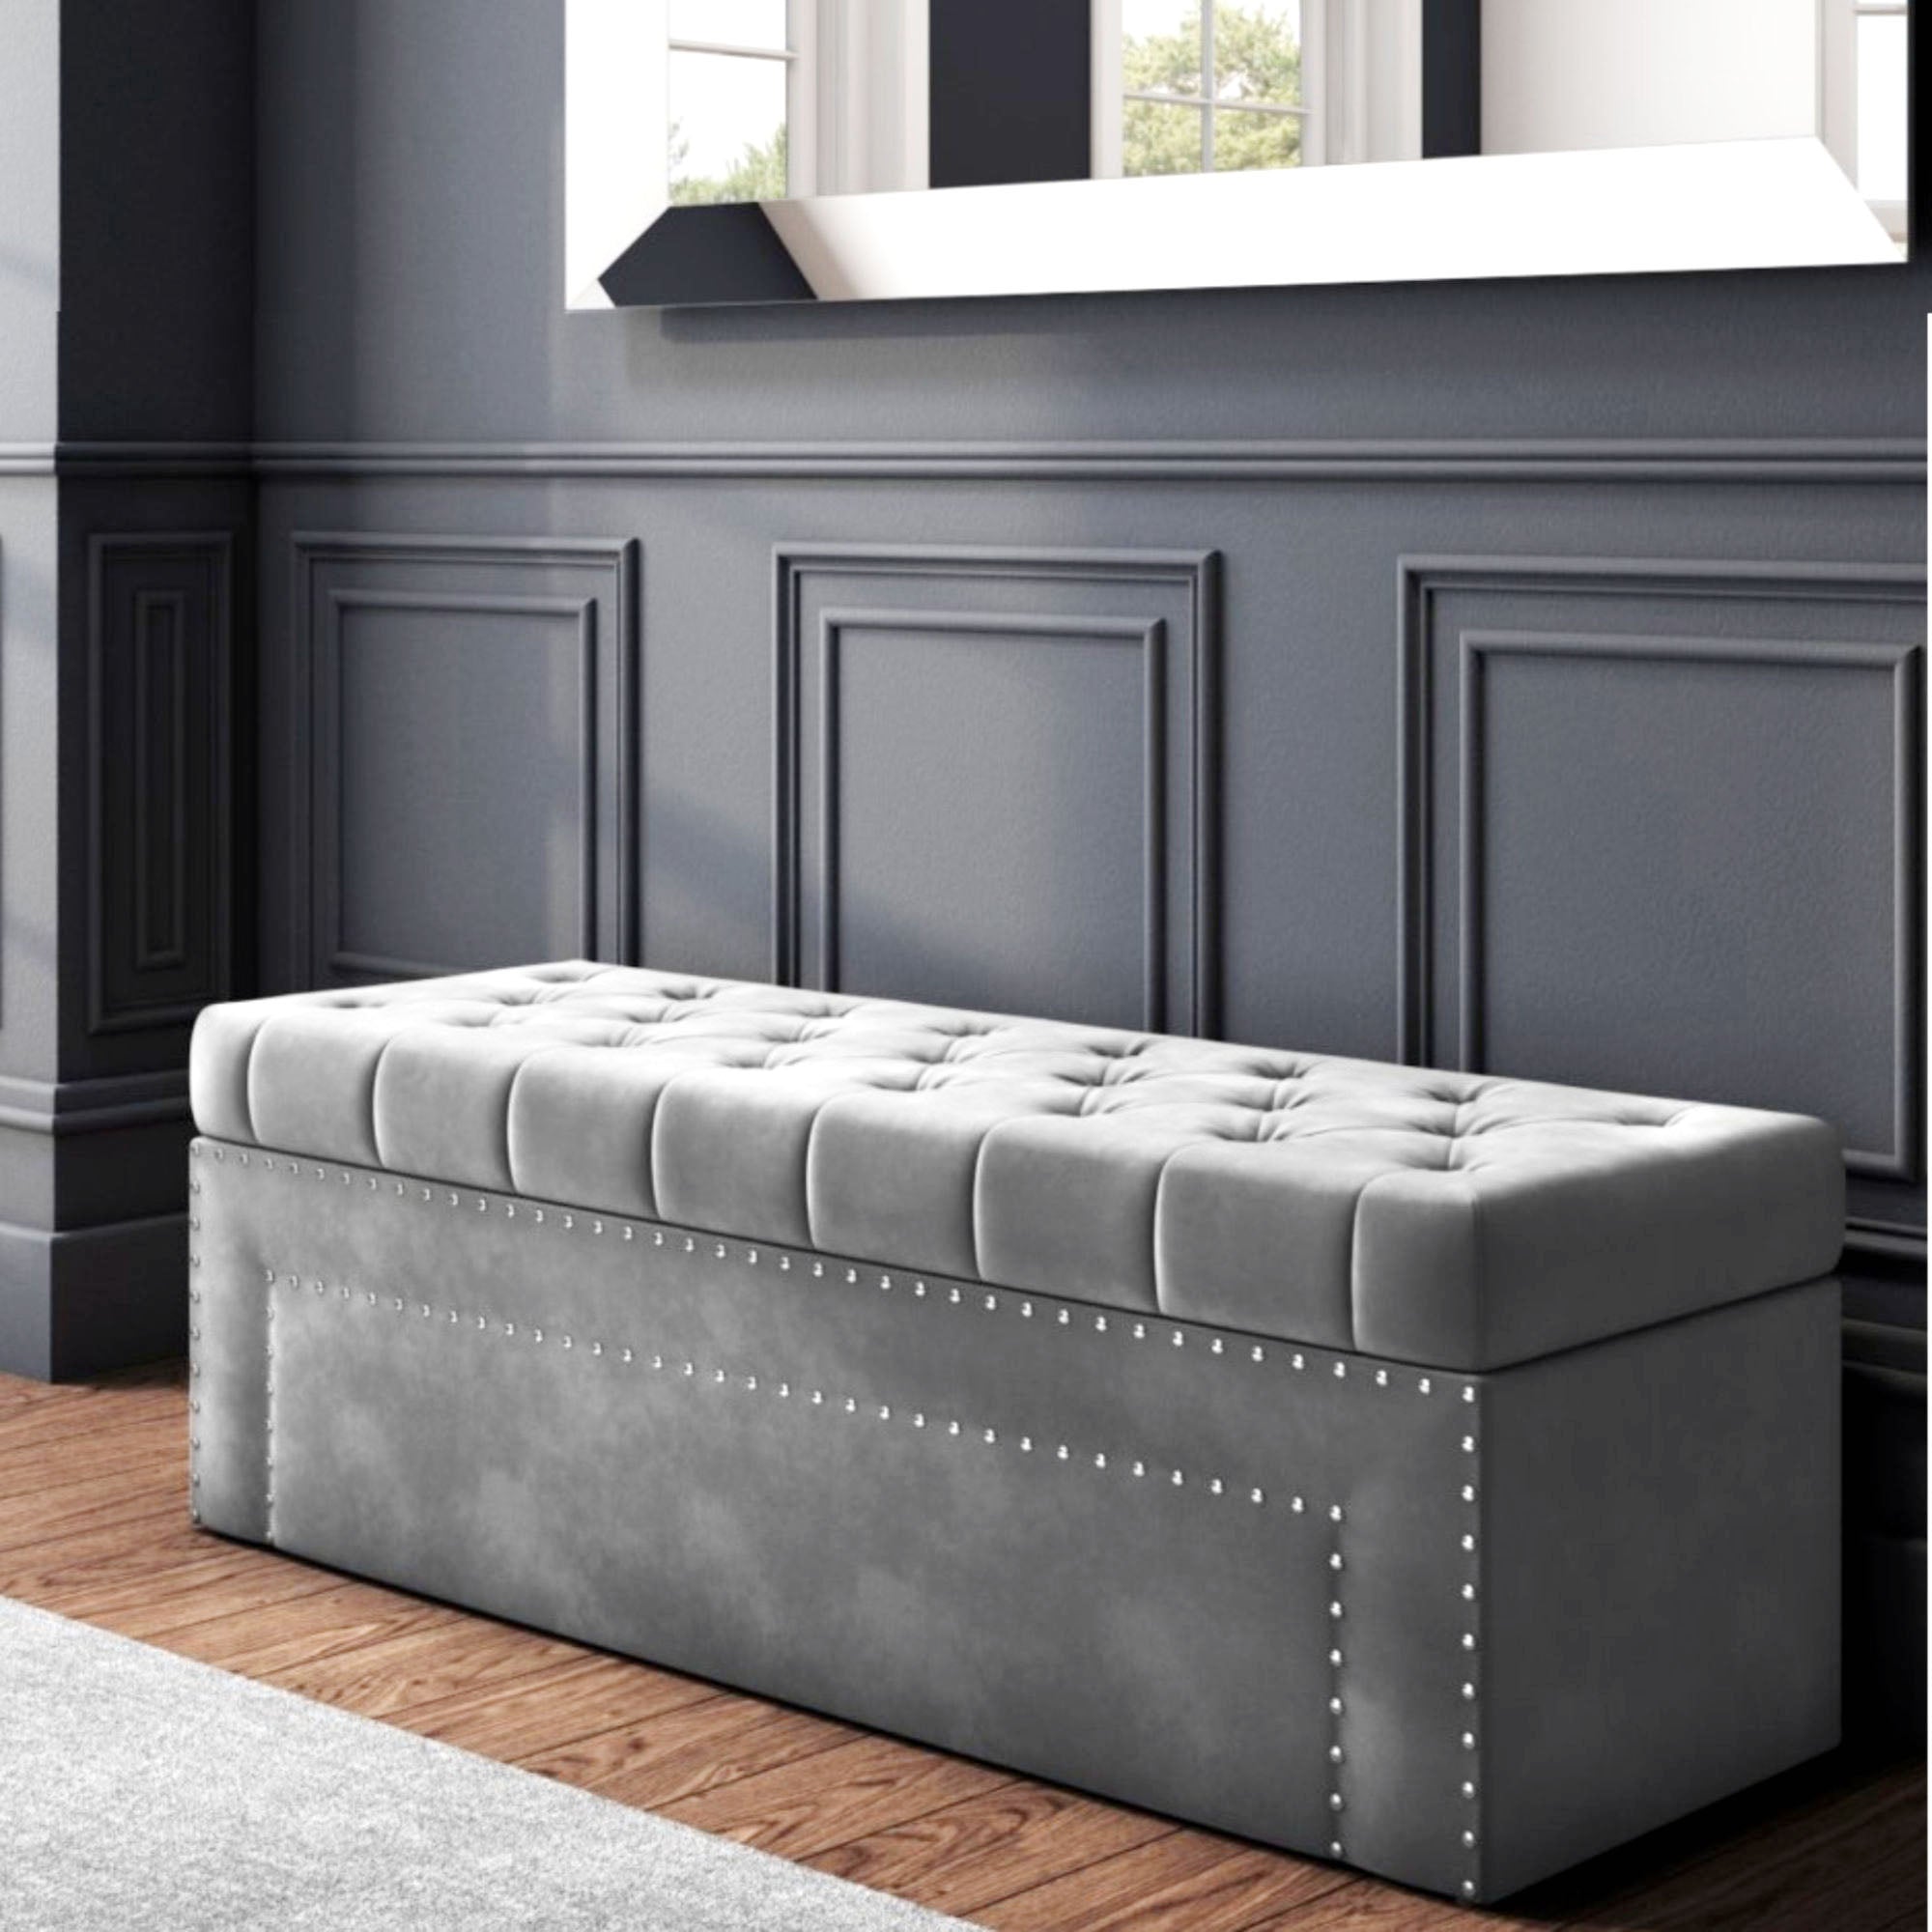 "Grey velvet ottoman storage bench: A chic and versatile storage solution in soft, luxurious grey velvet fabric. Keep your space organized with this stylish and comfortable ottoman, offering ample storage space for blankets, pillows, and more."